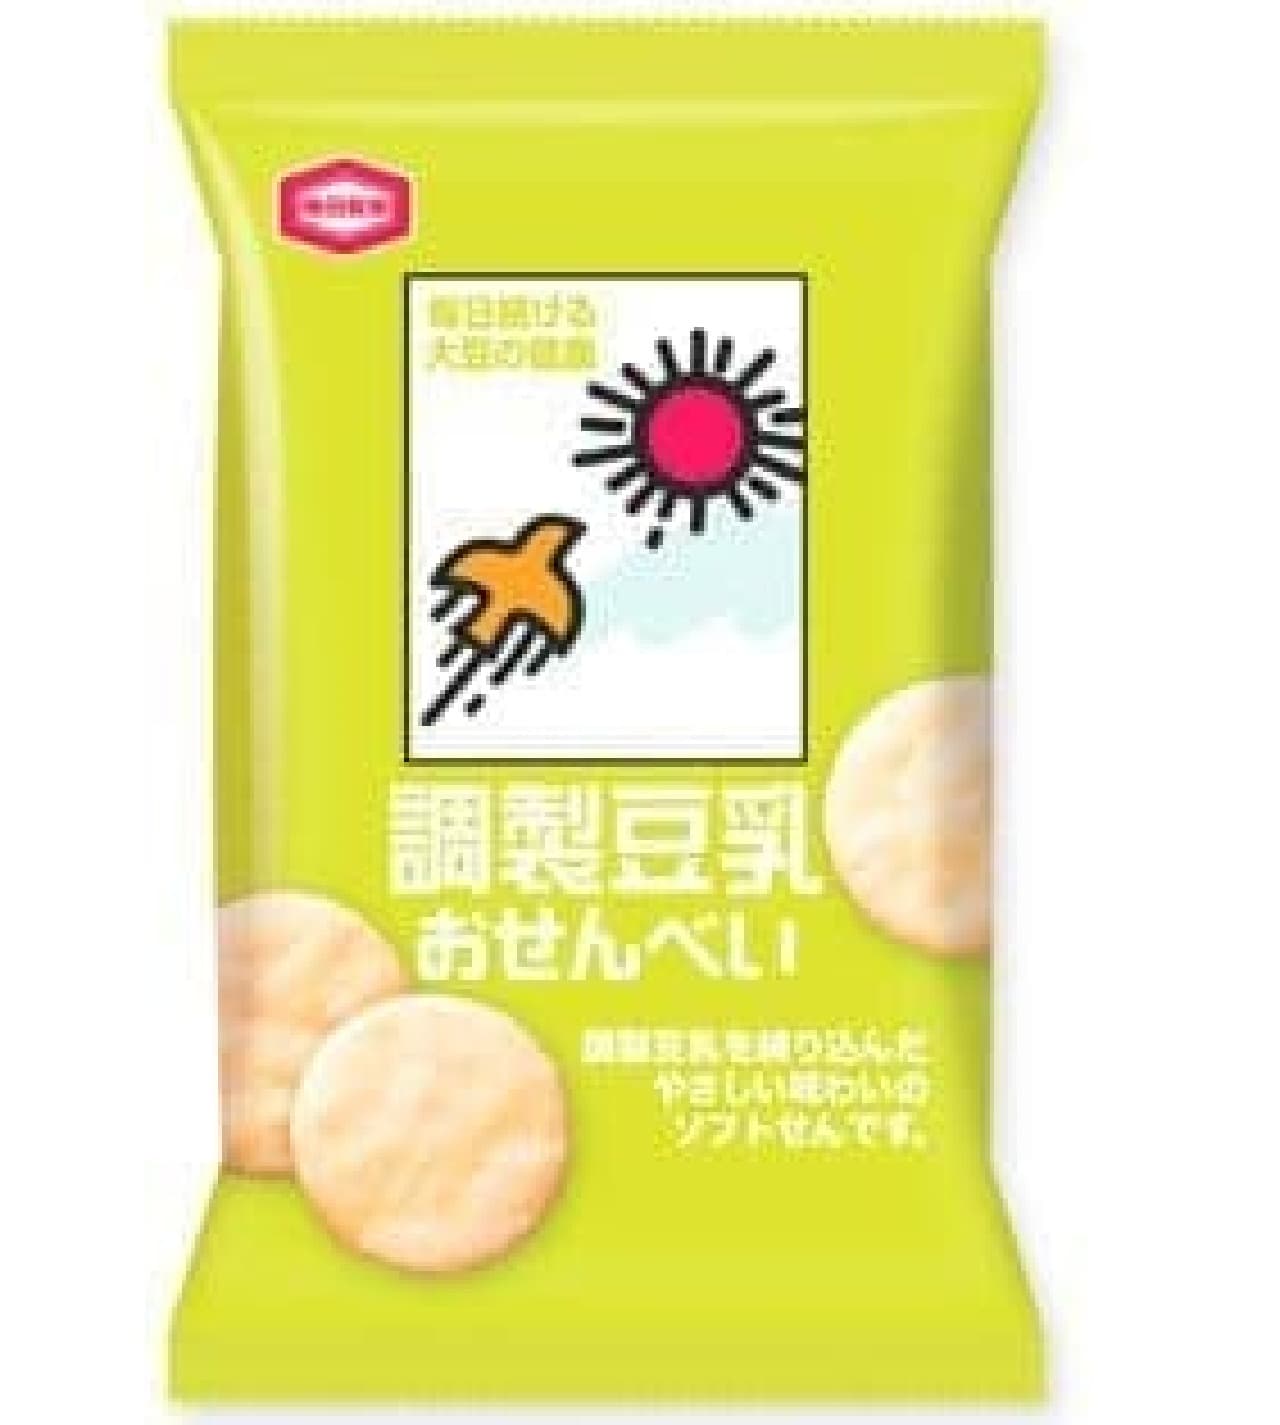 Popular soy milk drink is now available as "senbei"